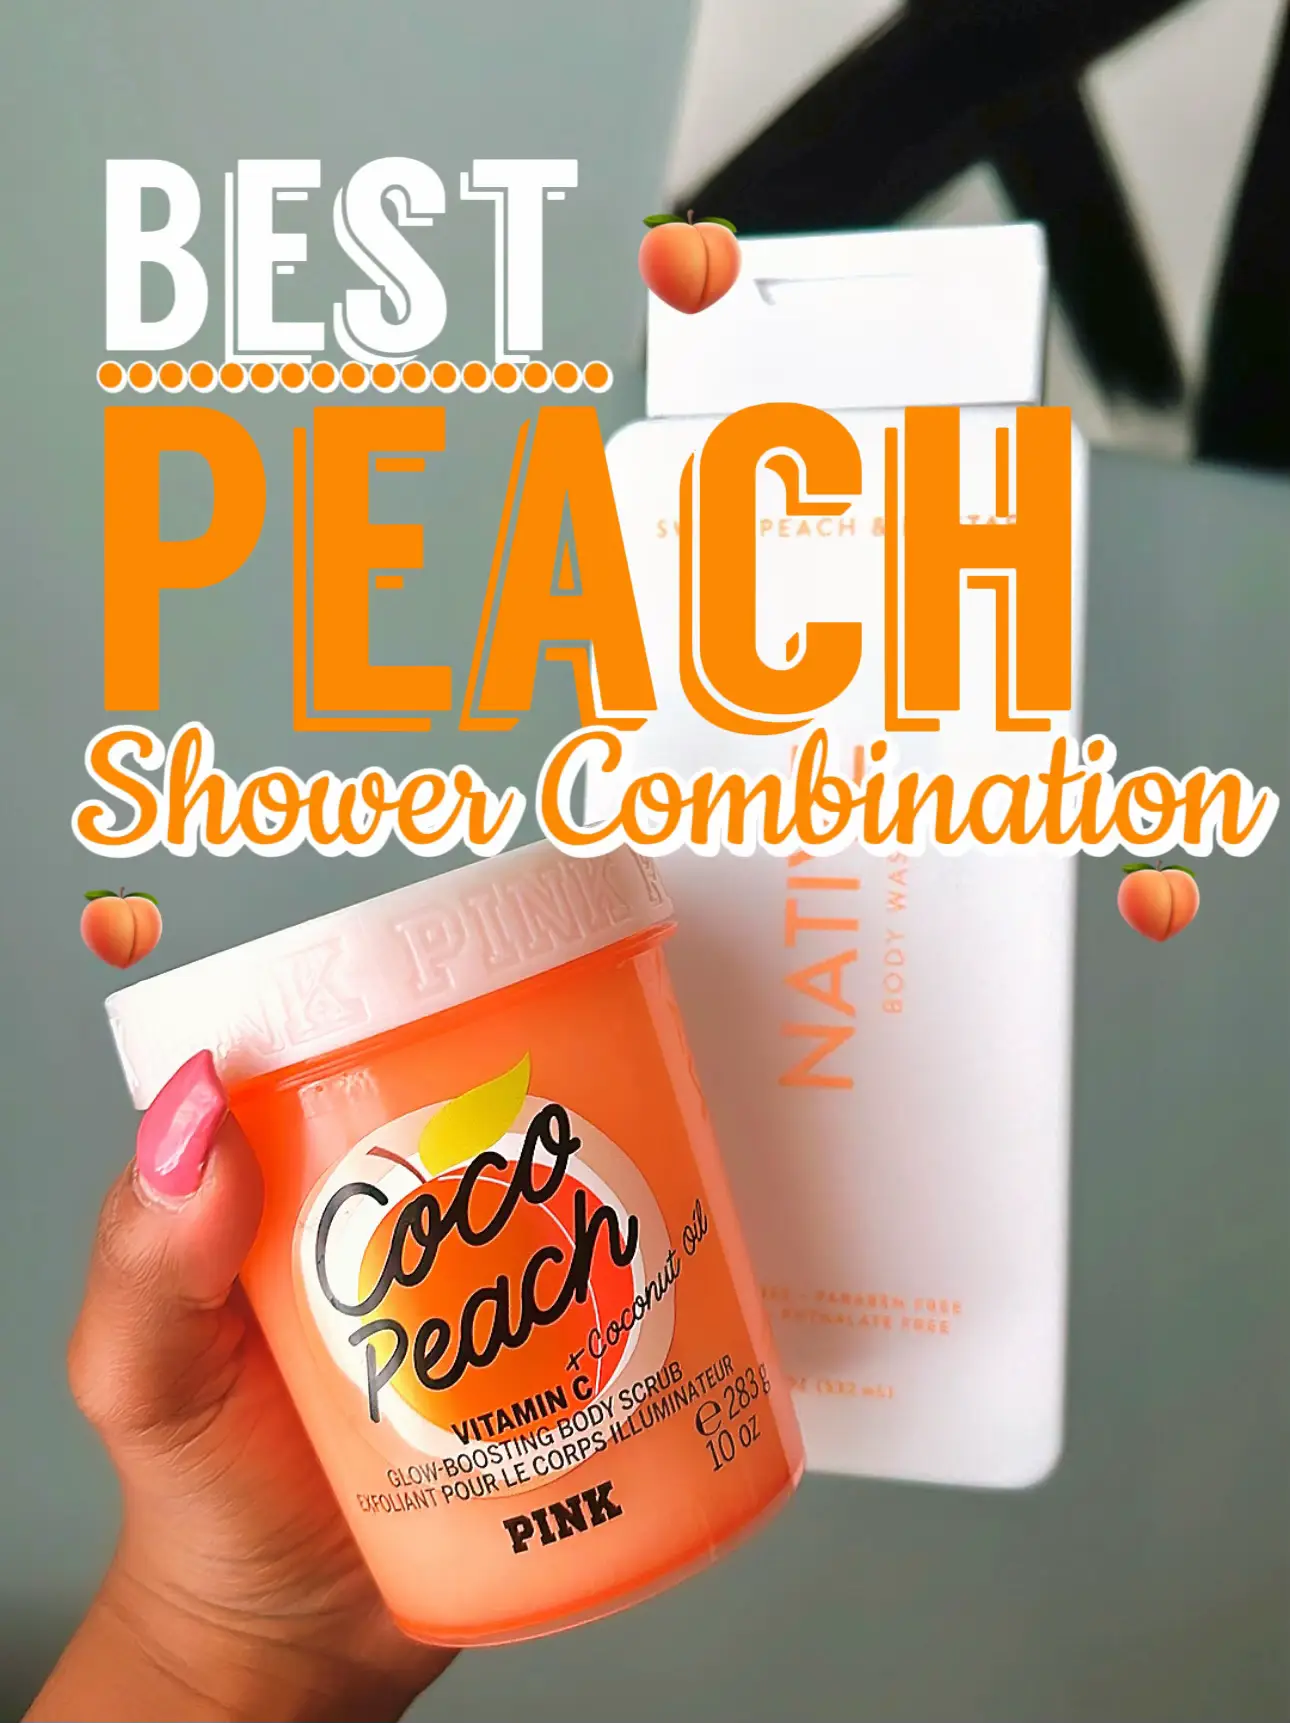  A person is holding a bottle of Cocoa Peach Shower Combination.